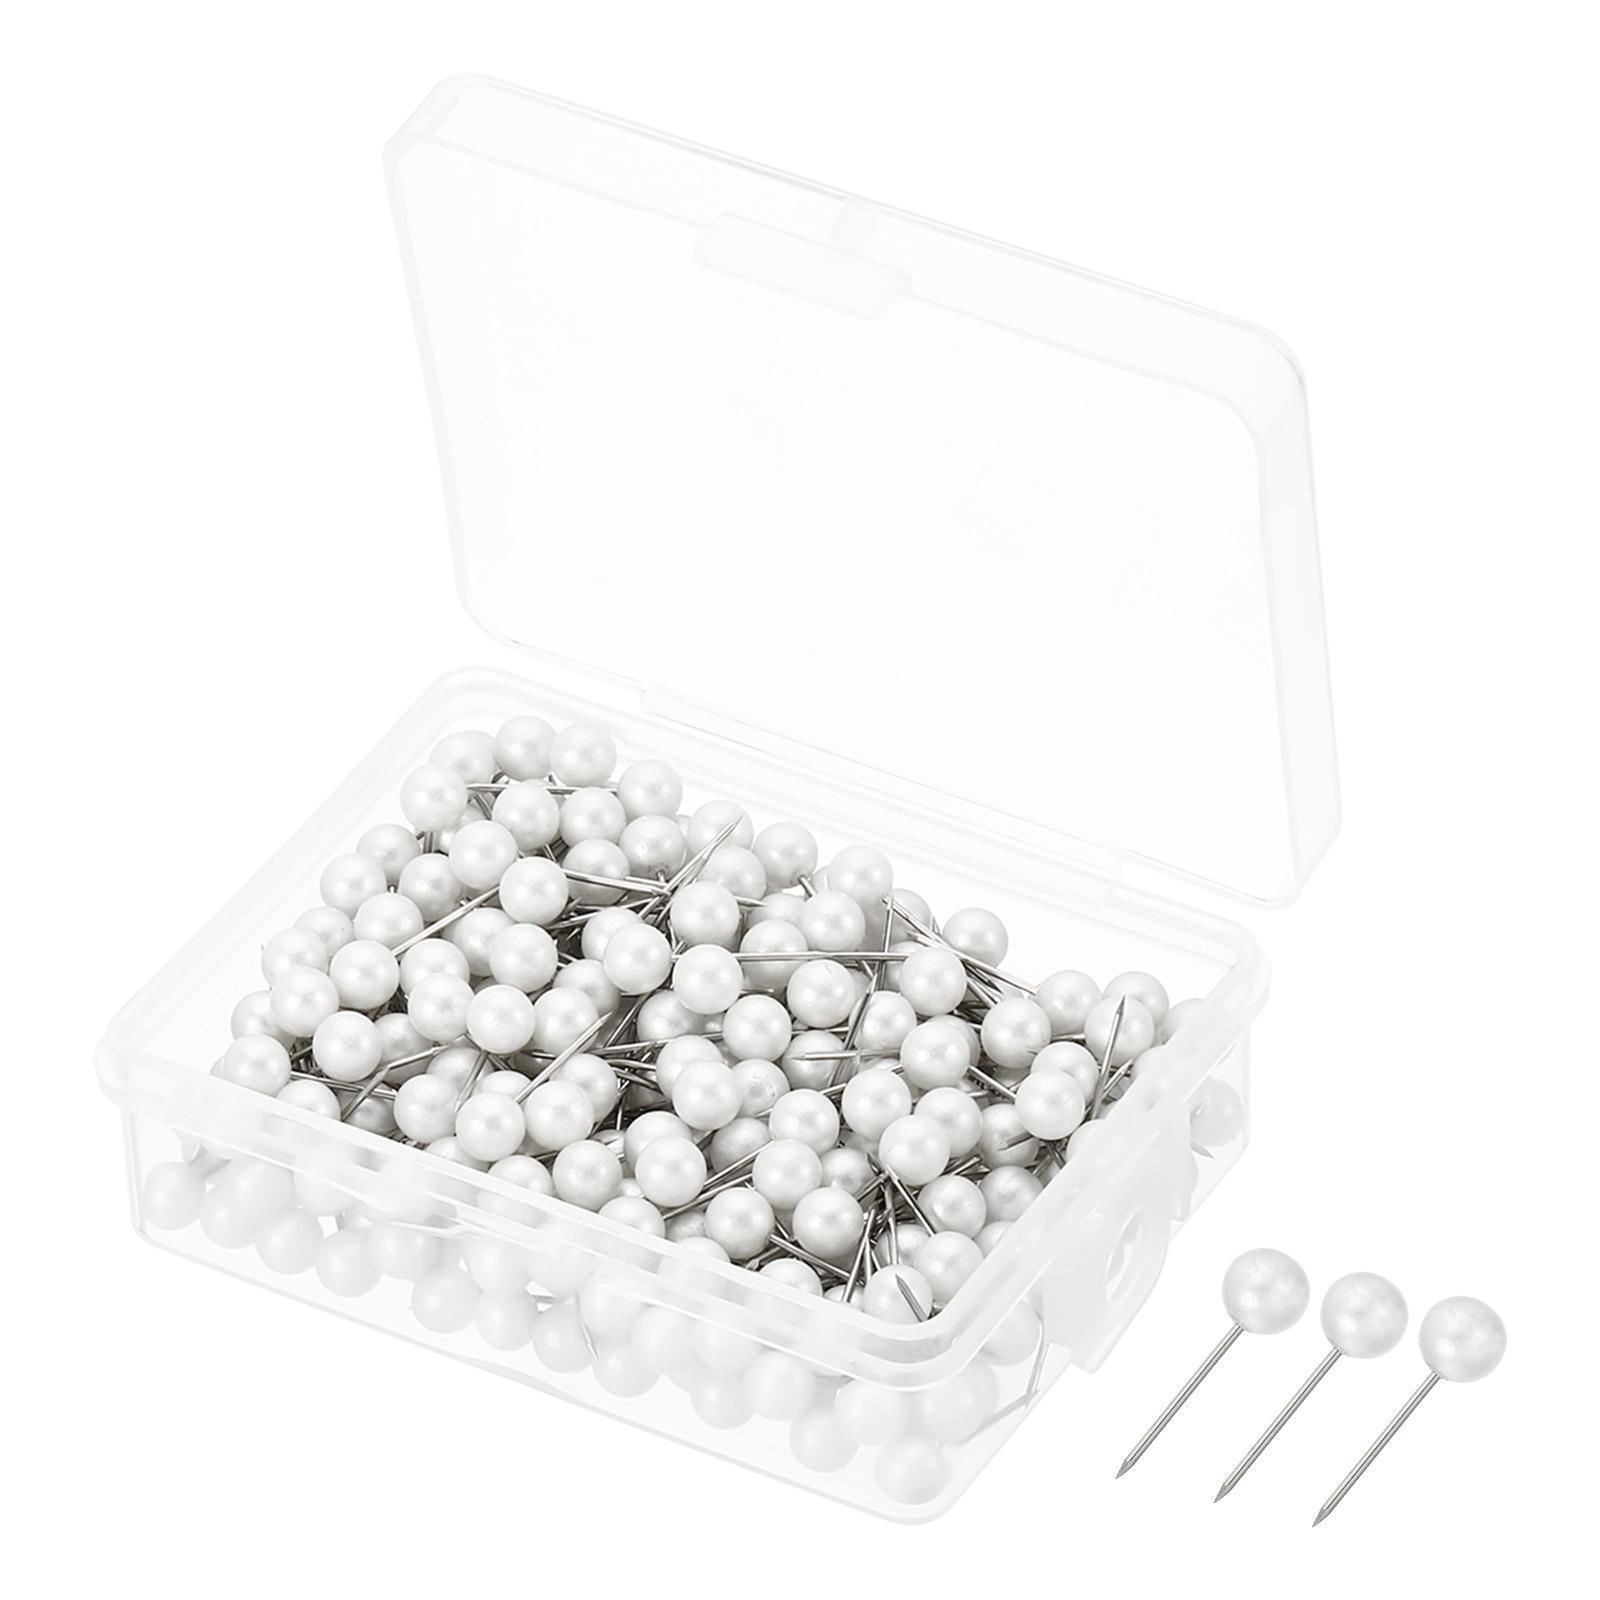 300pcs Push Pins, Round Head Map Tacks Steel Point For Office, White